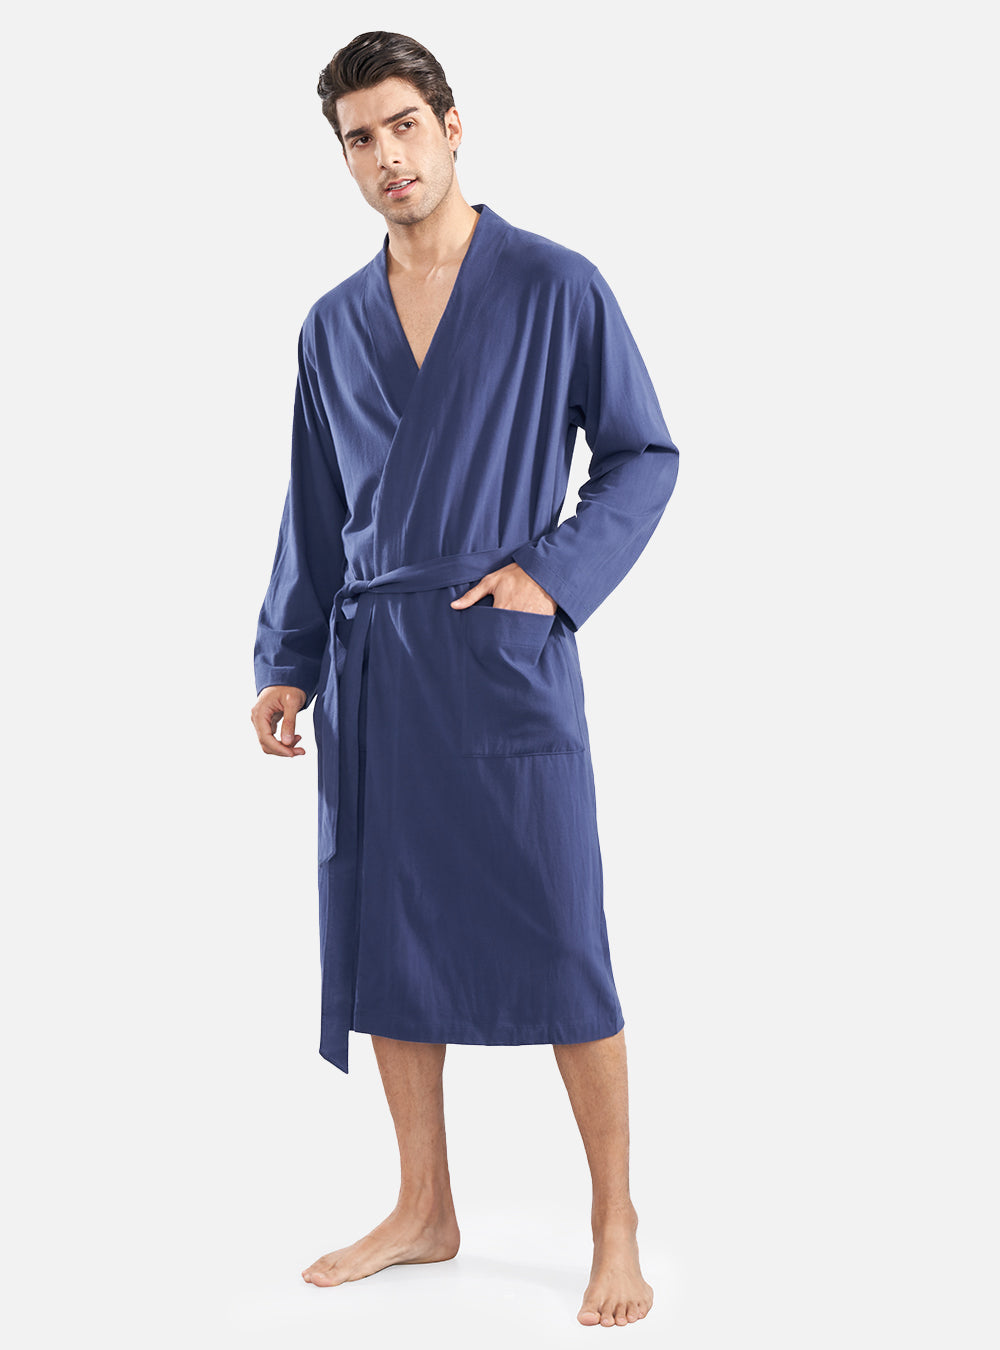 Four Seasons Robe Combed Cotton Long Length David Archy Combed